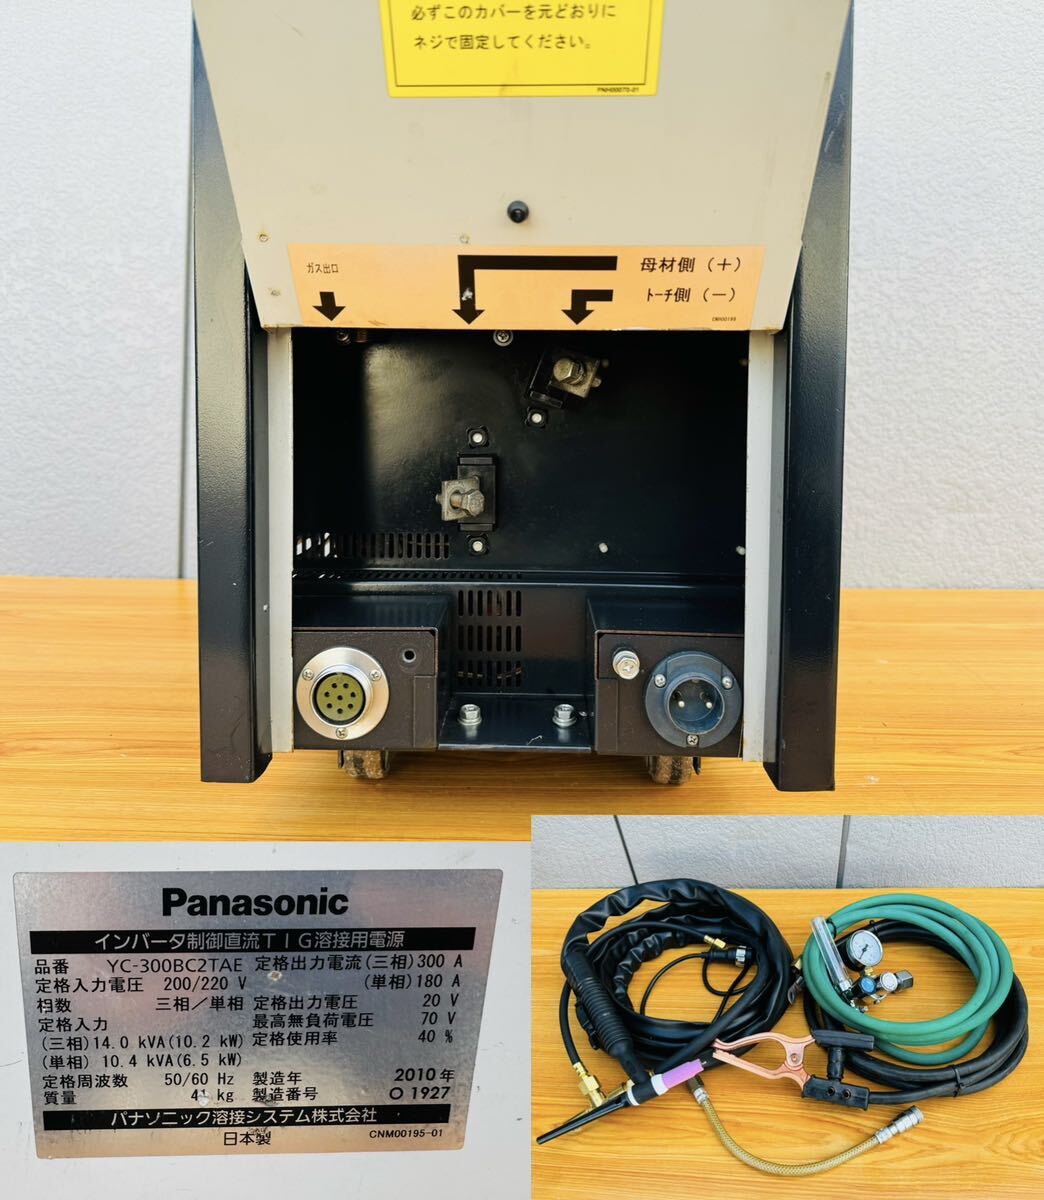 Panasonic inverter control direct current TIG welding for power supply YC-300BC2 operation verification settled 